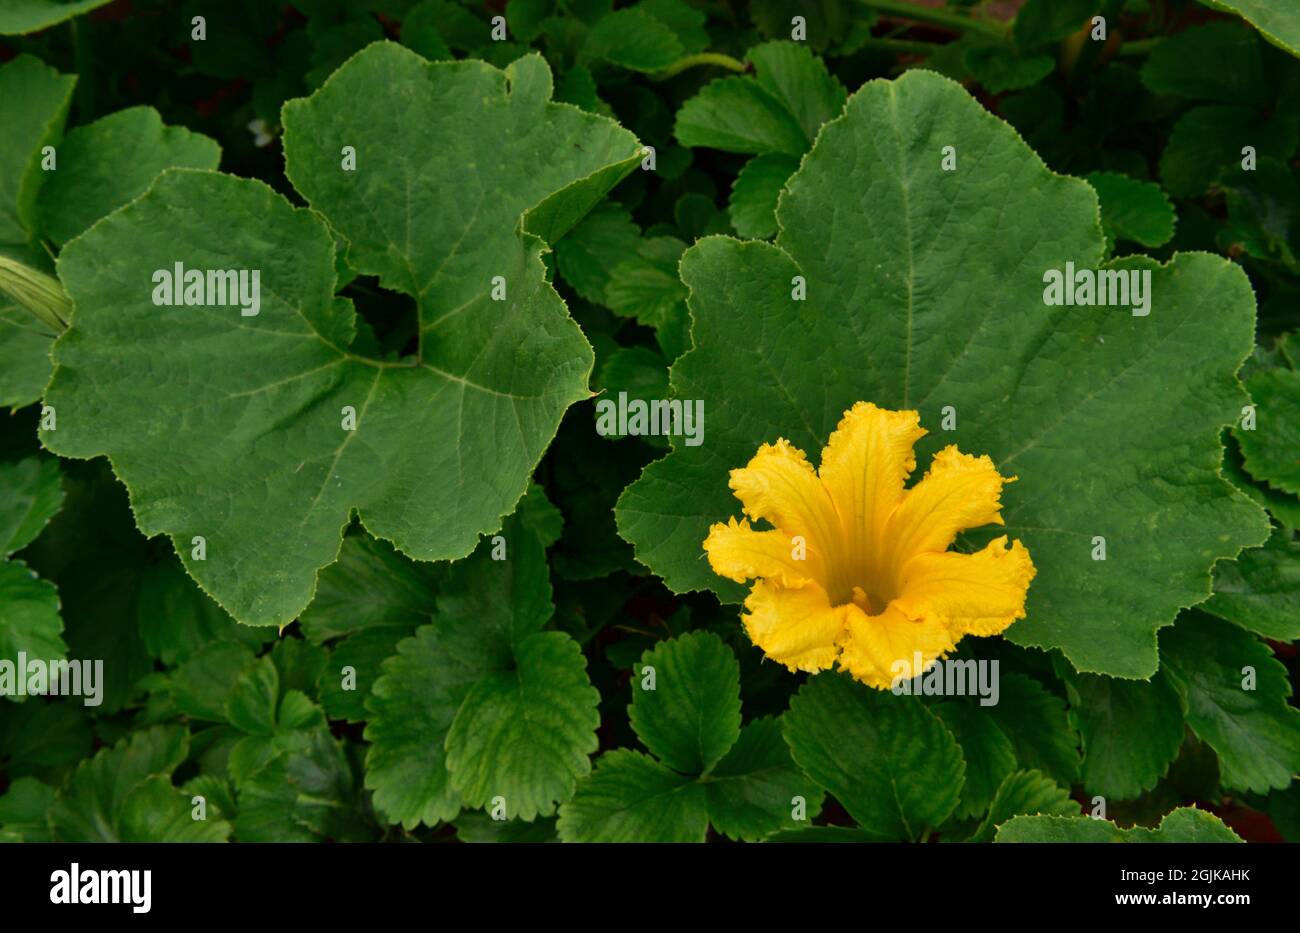 Yellow flower on growing Winter Hokkaido Squash plant in home garden with strawberry plants underneath, UK Stock Photo